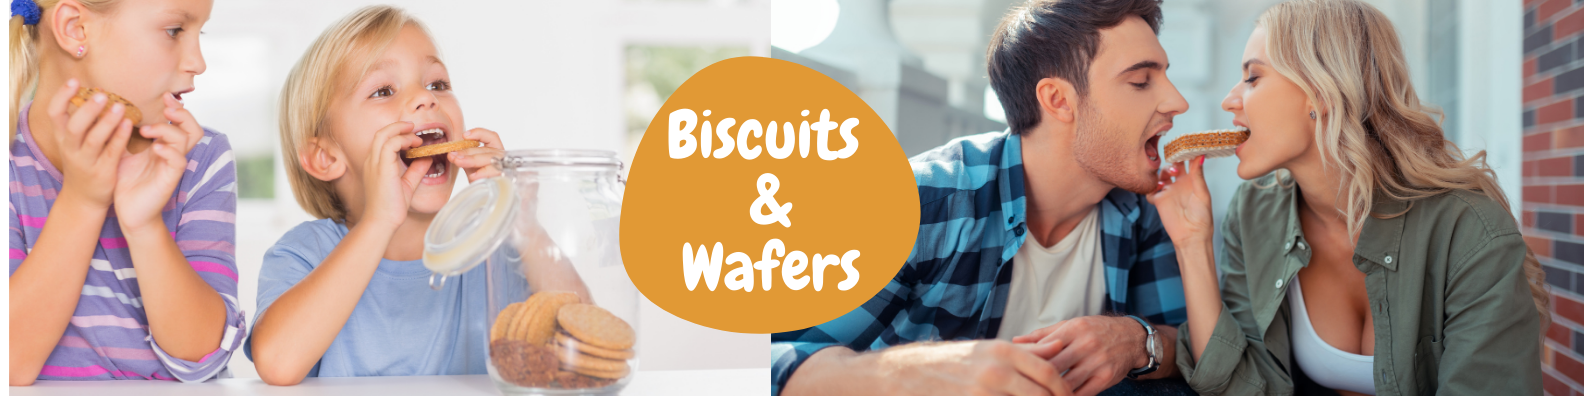 Biscuits and Wafers